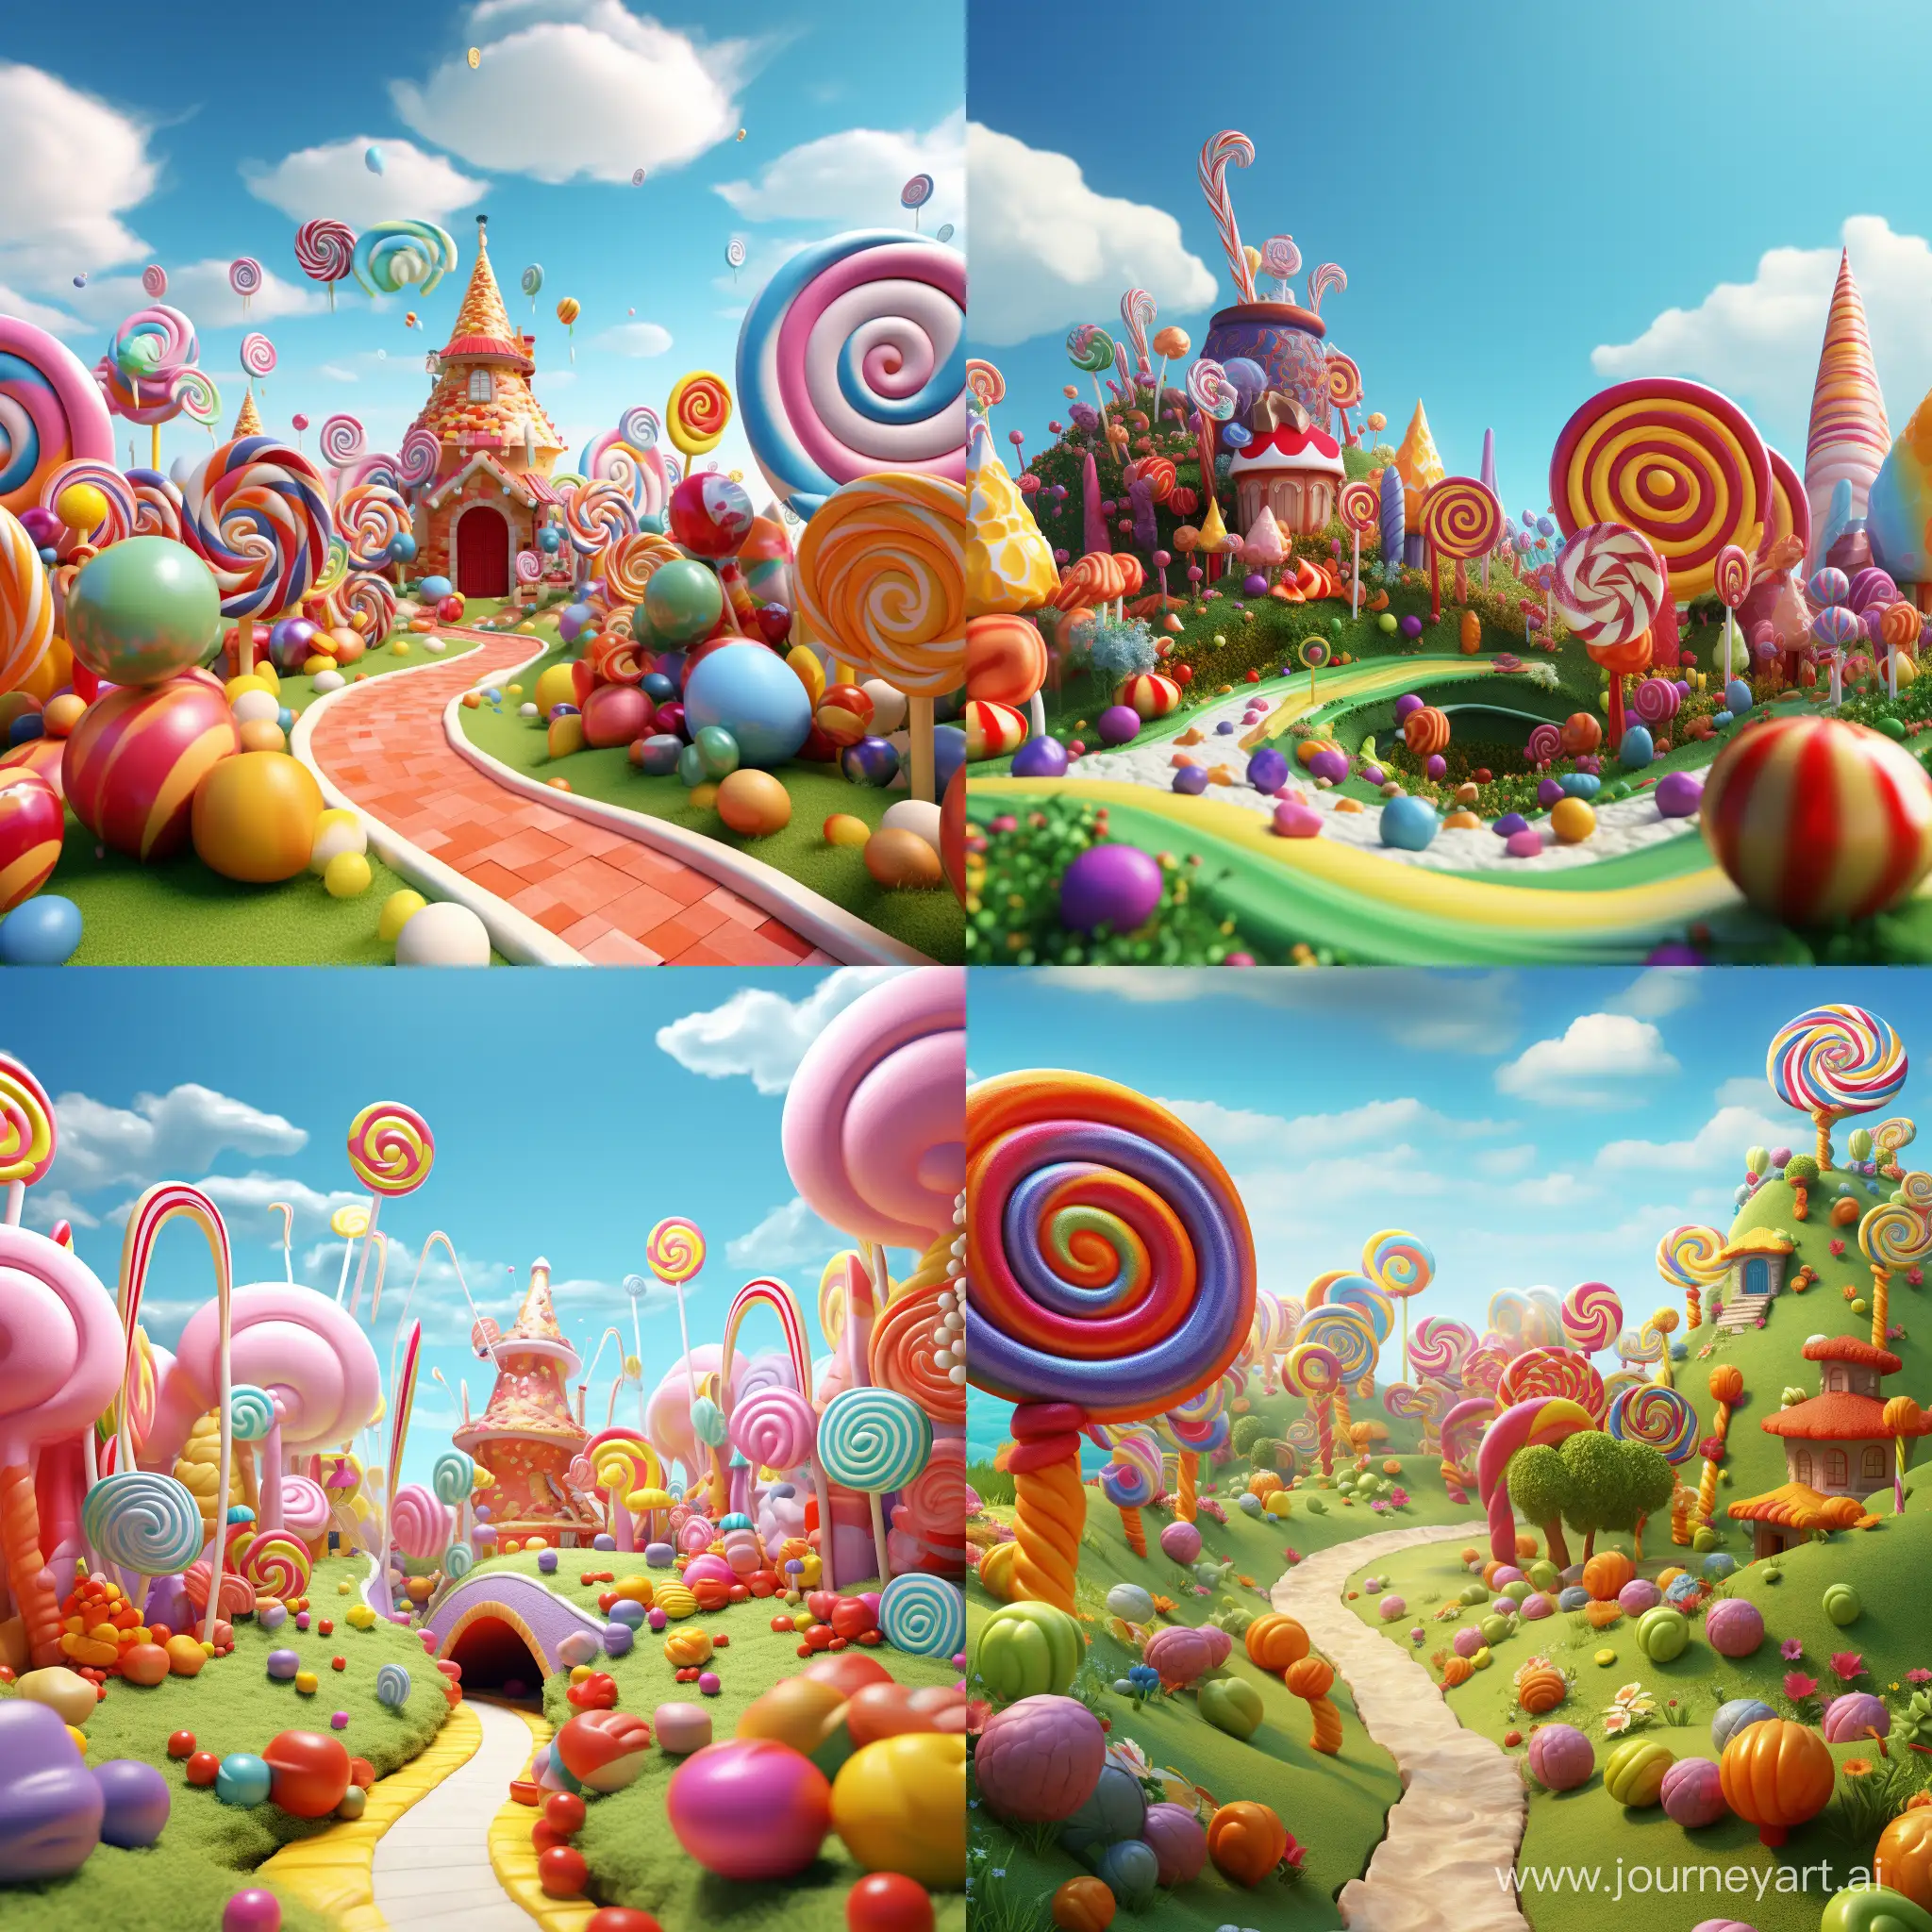 Vibrant-3D-Candy-Rainbow-Whimsical-Animation-in-Perfect-Square-Ratio